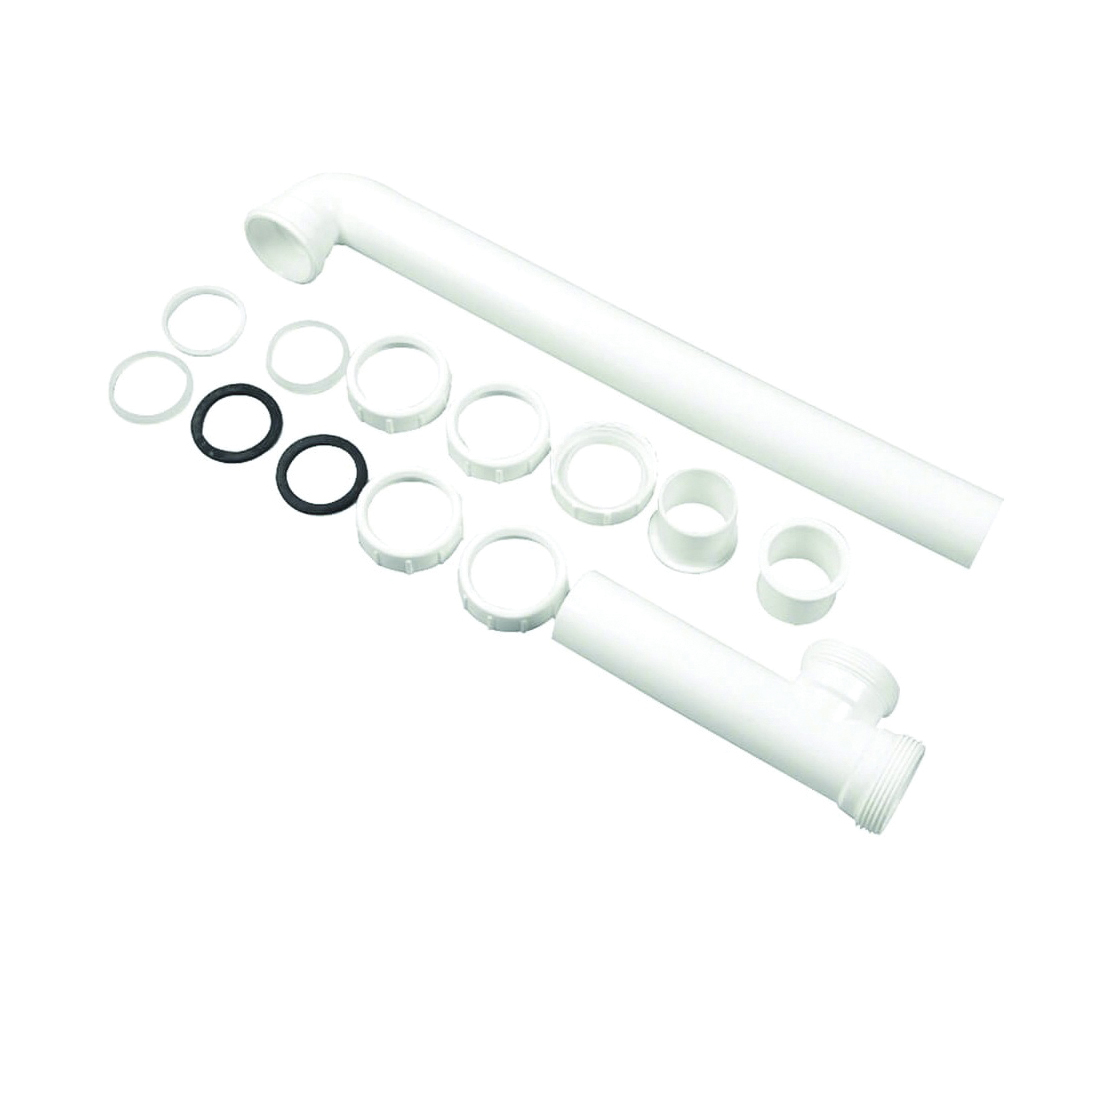 94008 End Outlet Waste Drain Pipe, 1-1/2 in, Slip, Plastic, White